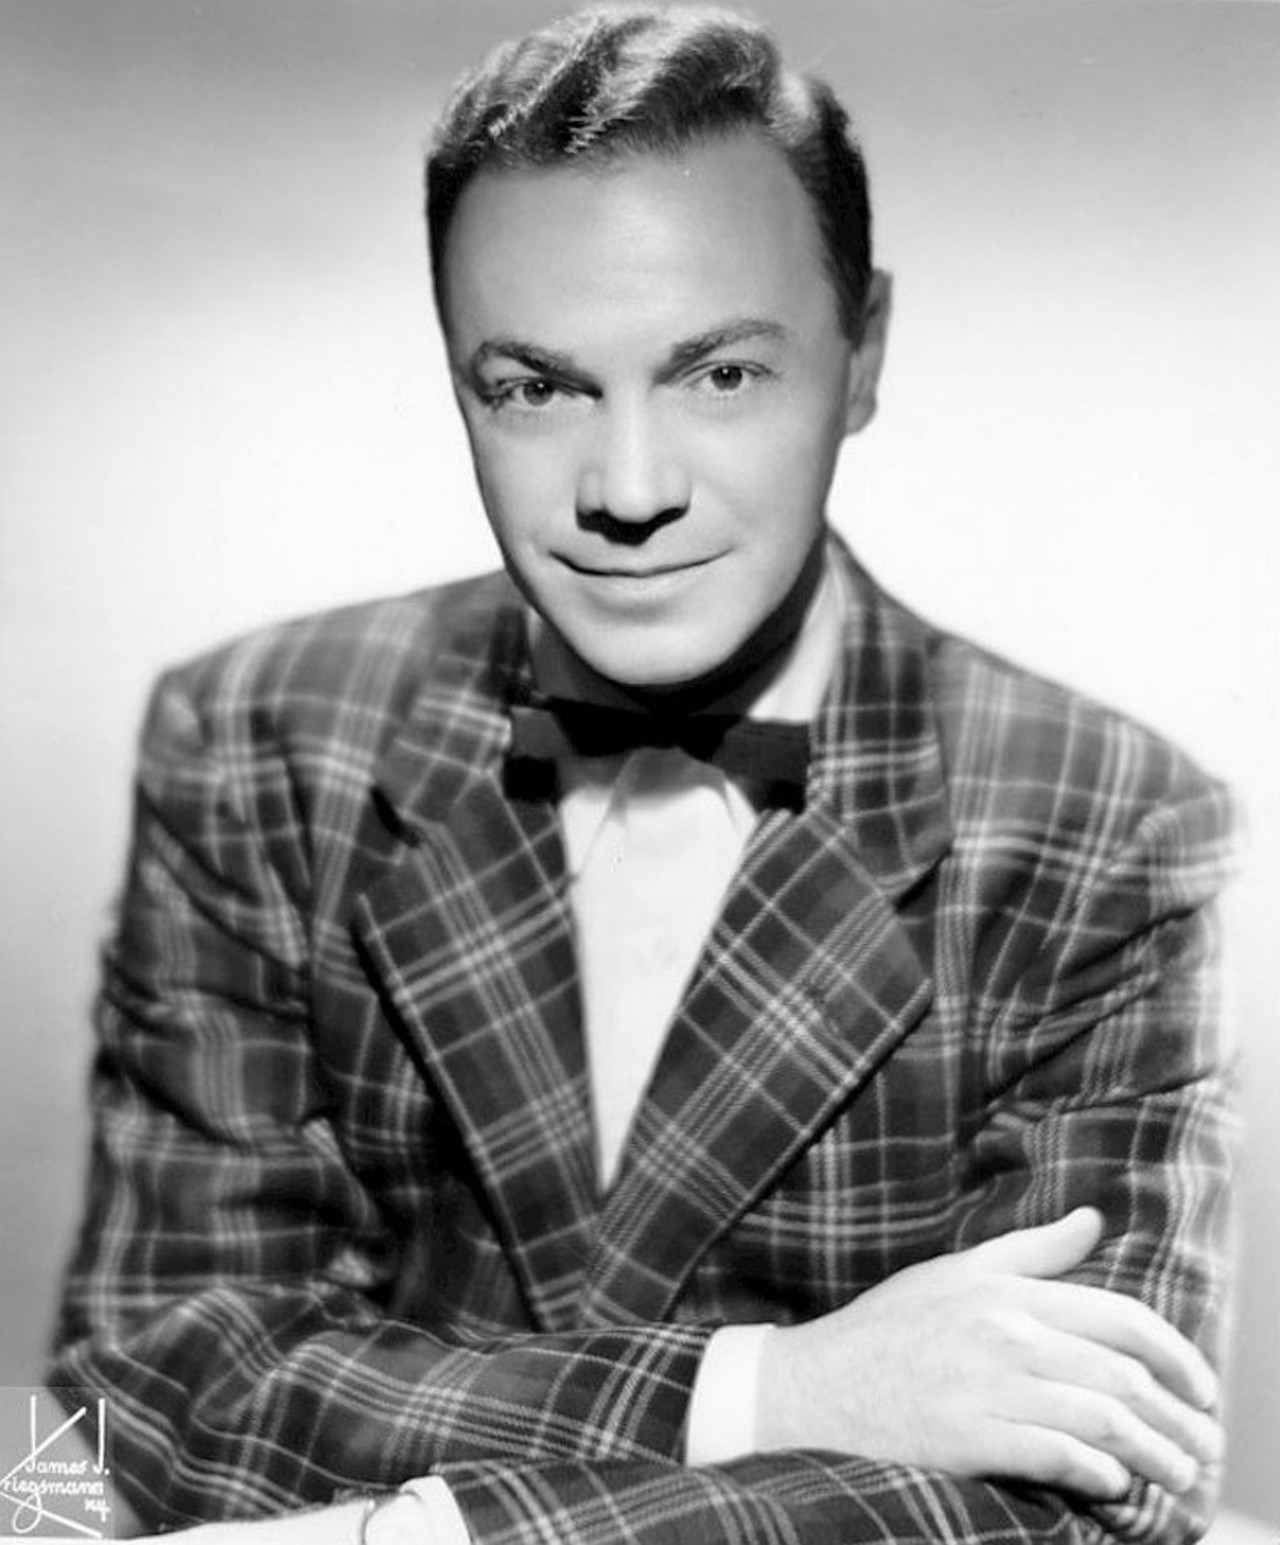 Alan Freed
Lakeview Cemetery
Though Freed was not the first DJ to play rock &#145;n&#146; roll on the radio, he is known for popularizing the genre and also for organizing the first rock &#145;n&#146; roll concert. He became a kind of scapegoat for the 1959 payola scandal and tragically ended up drinking himself to death. 
Photo via Wikimedia Commons